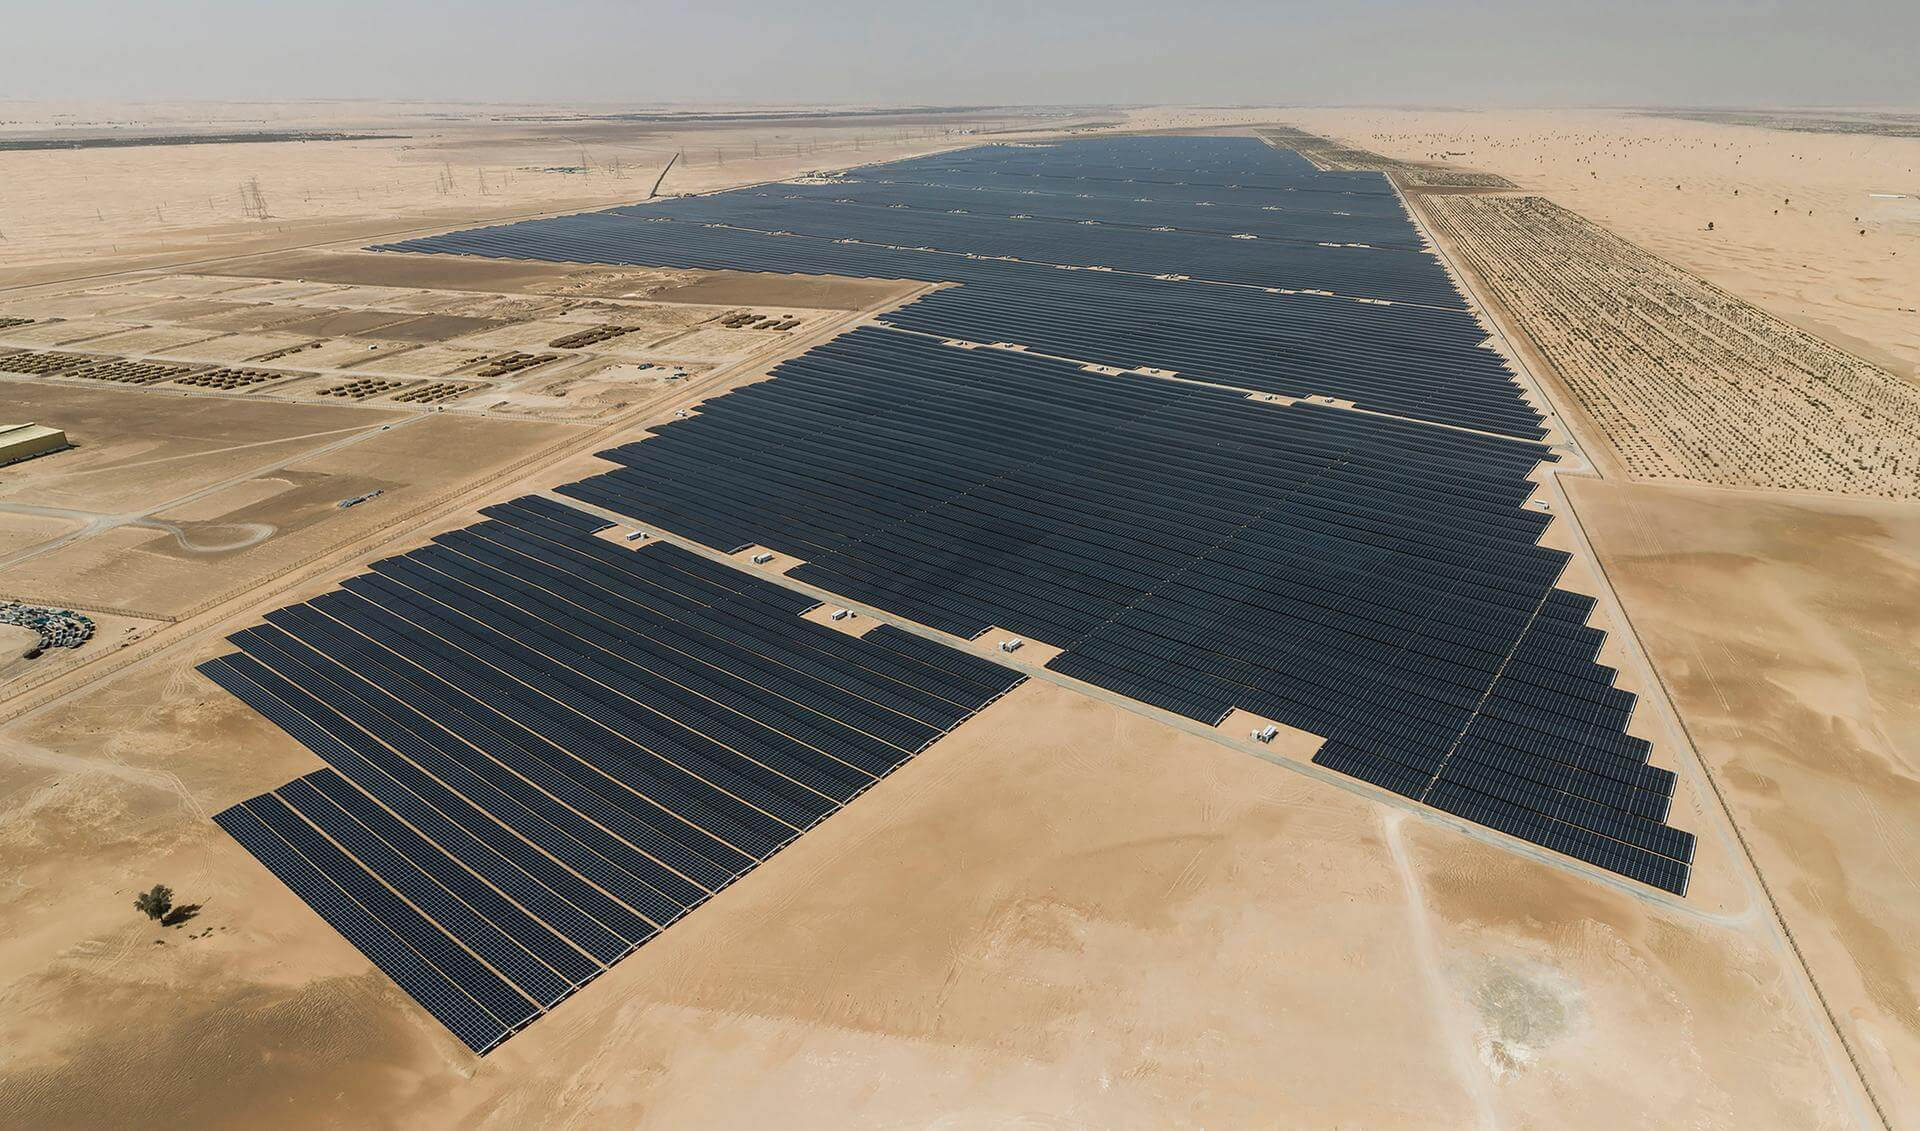 UAE powers on Noor Abu Dhabi, the world's largest solar project